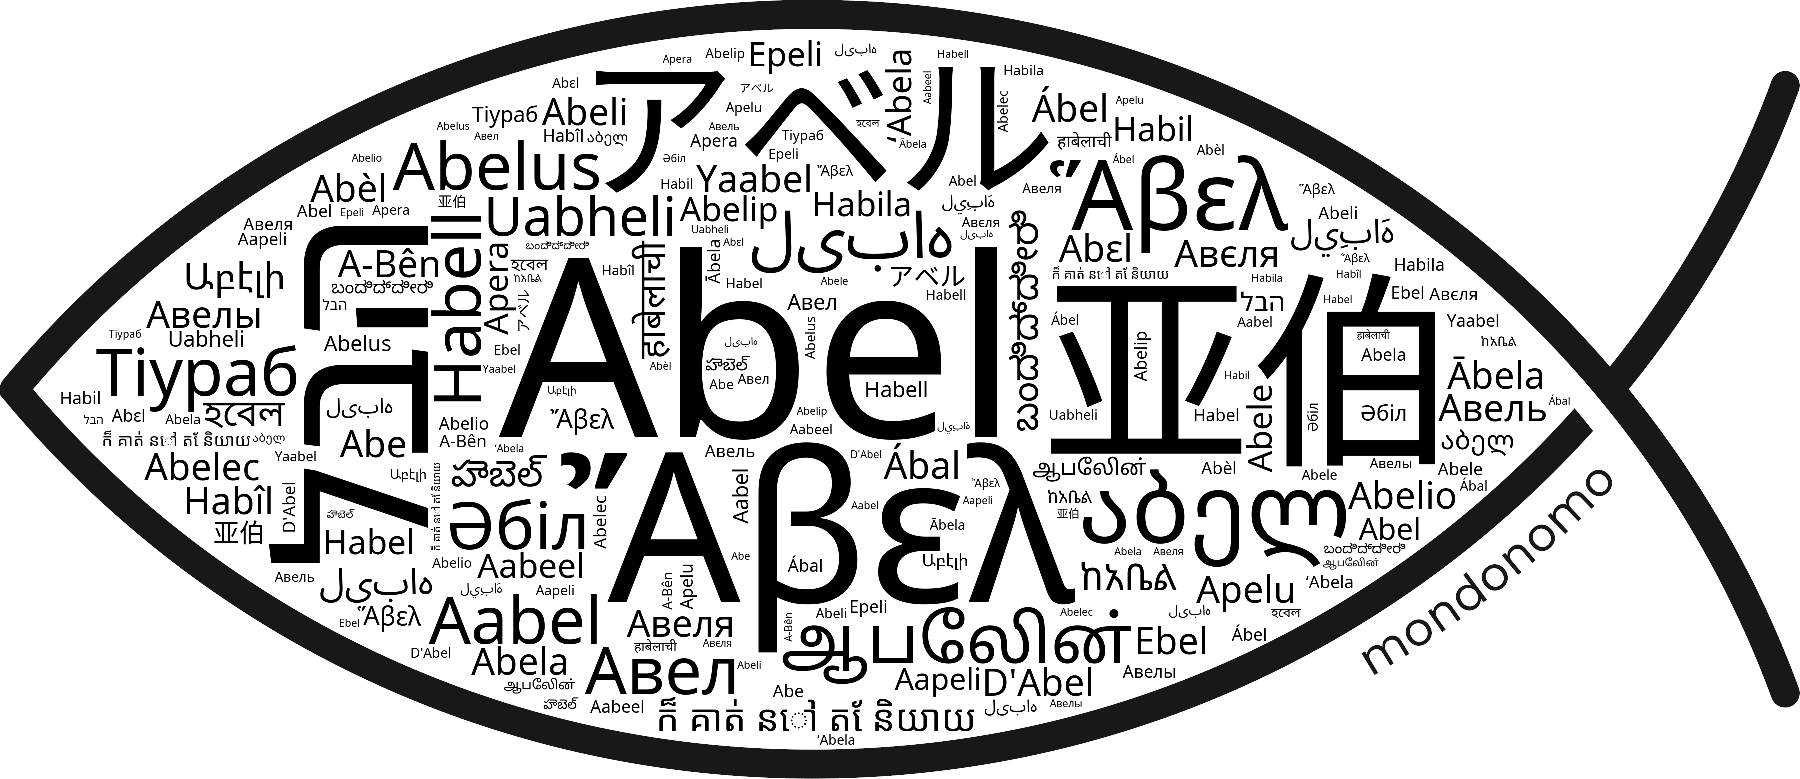 Name Abel in the world's Bibles